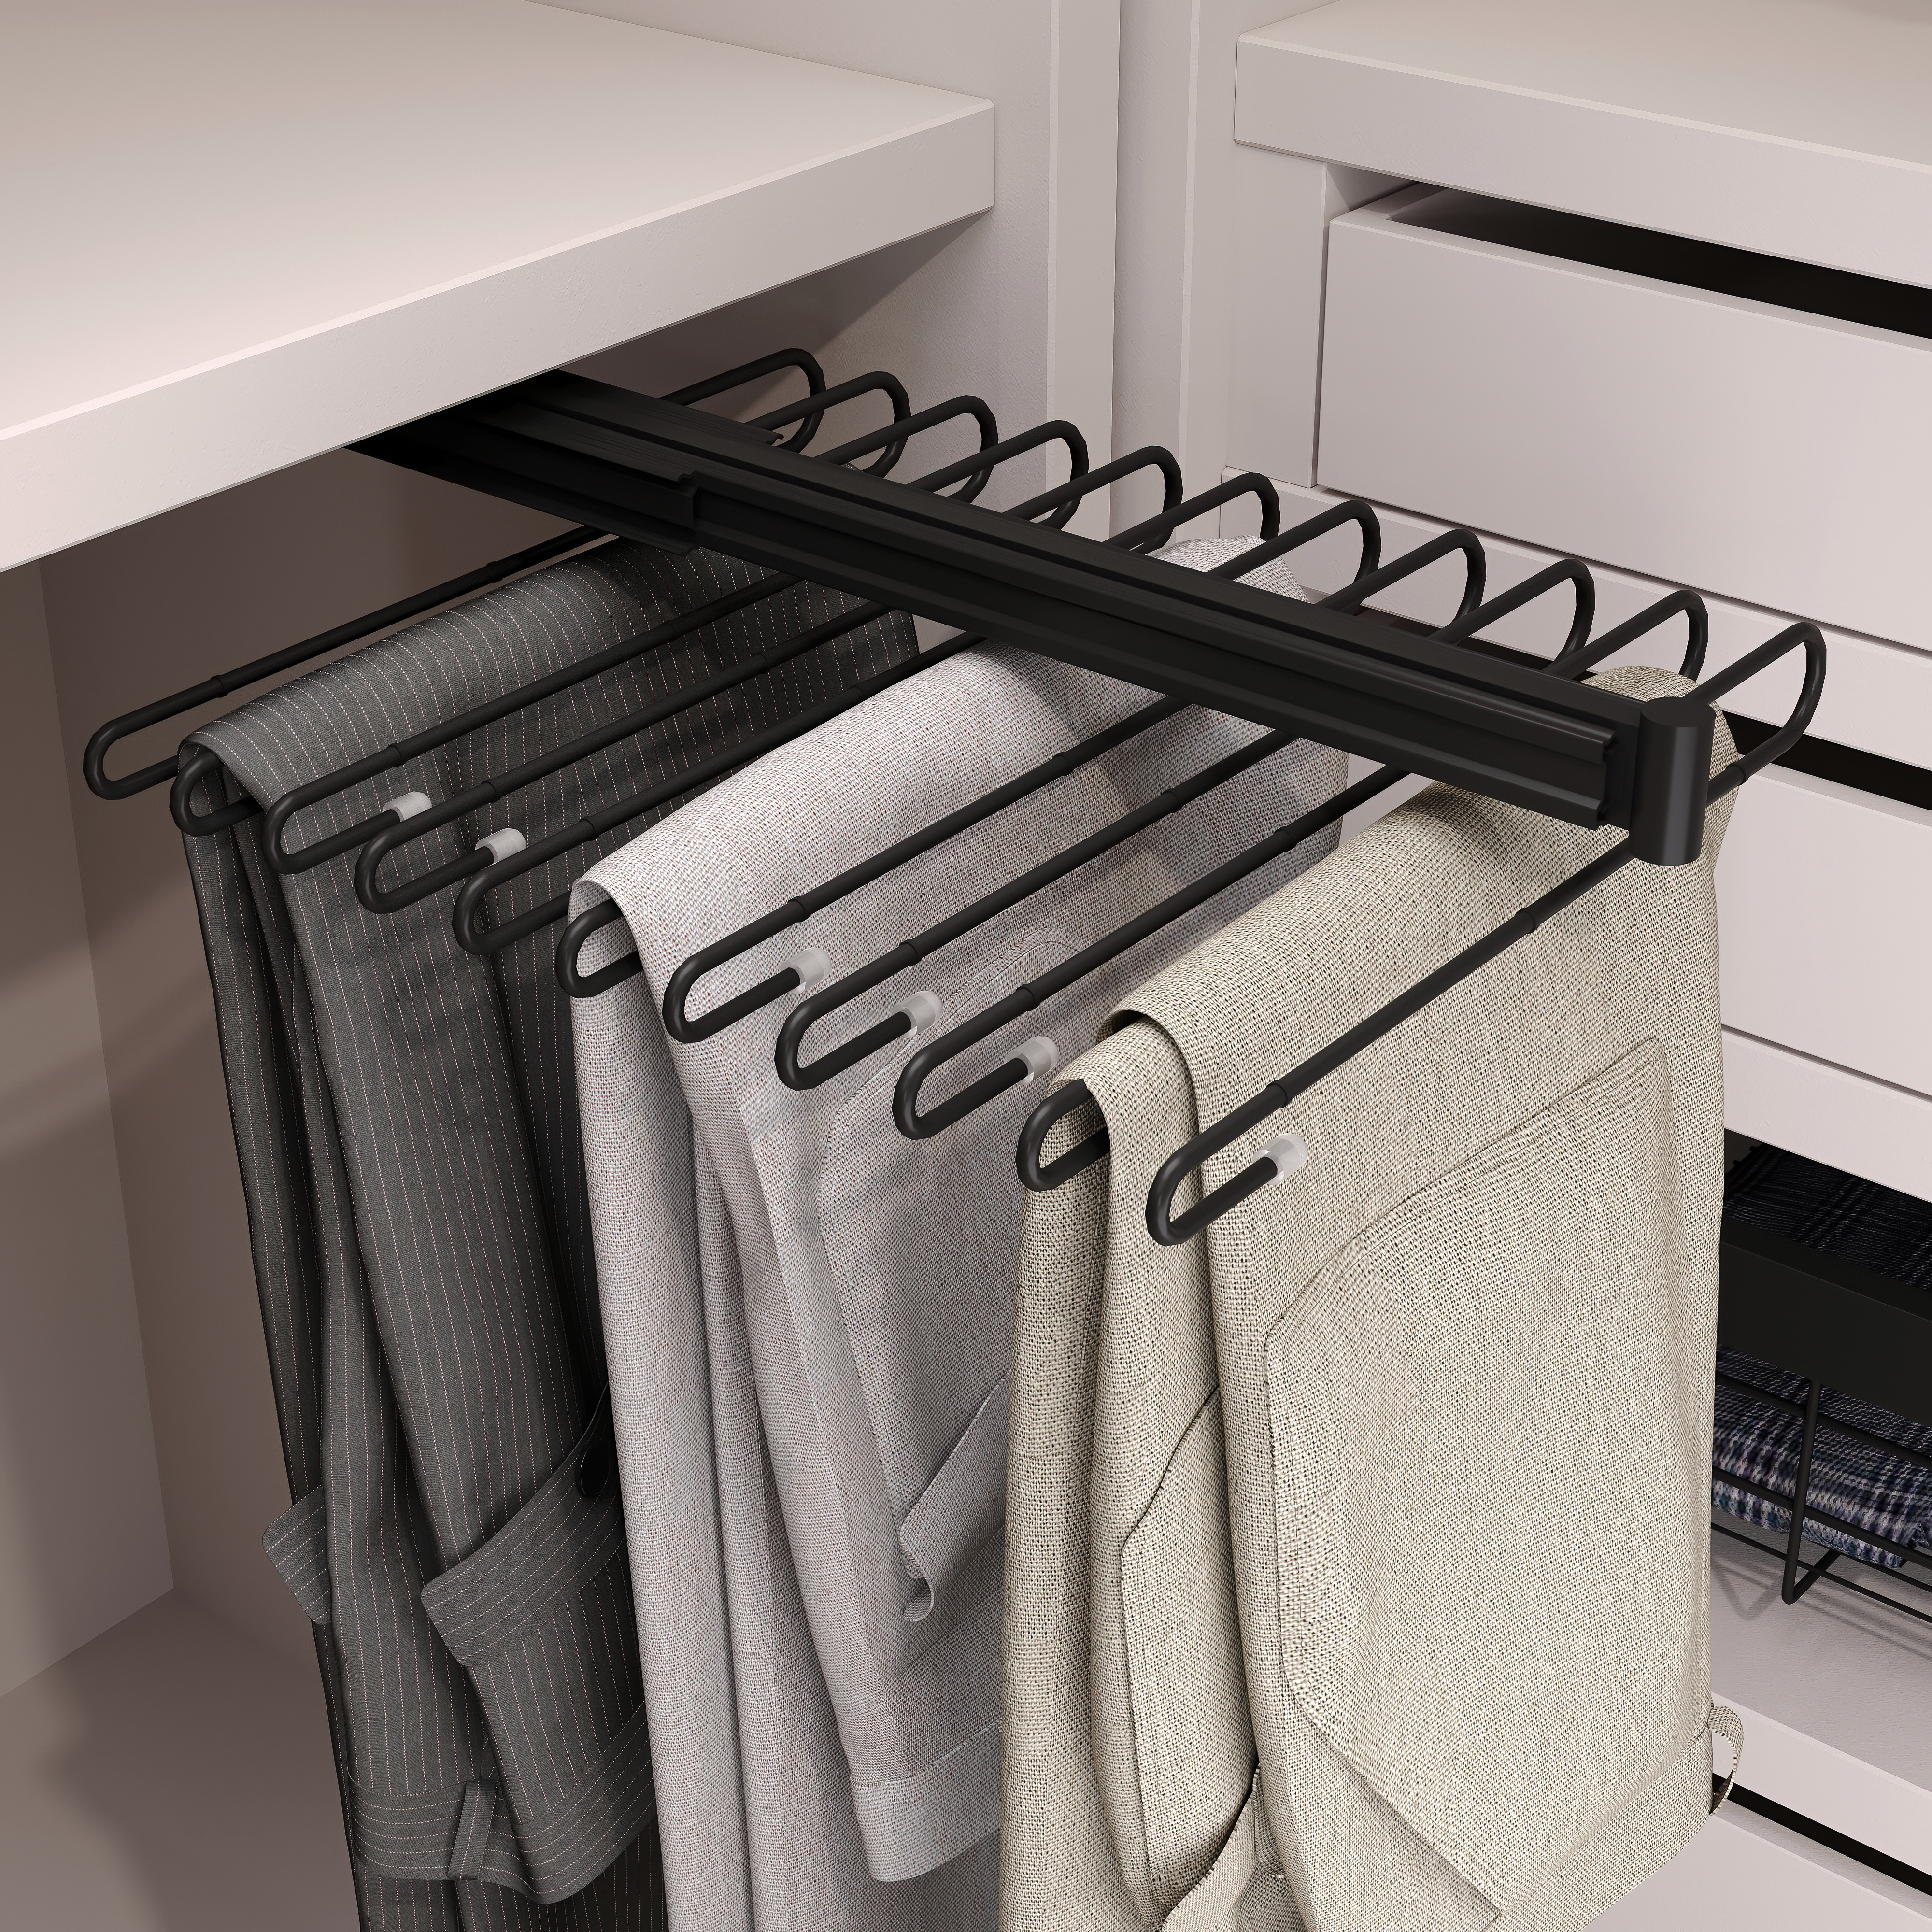 KOMPLEMENT pullout trousers hanger 93x344x5 cm in grey  3D Warehouse